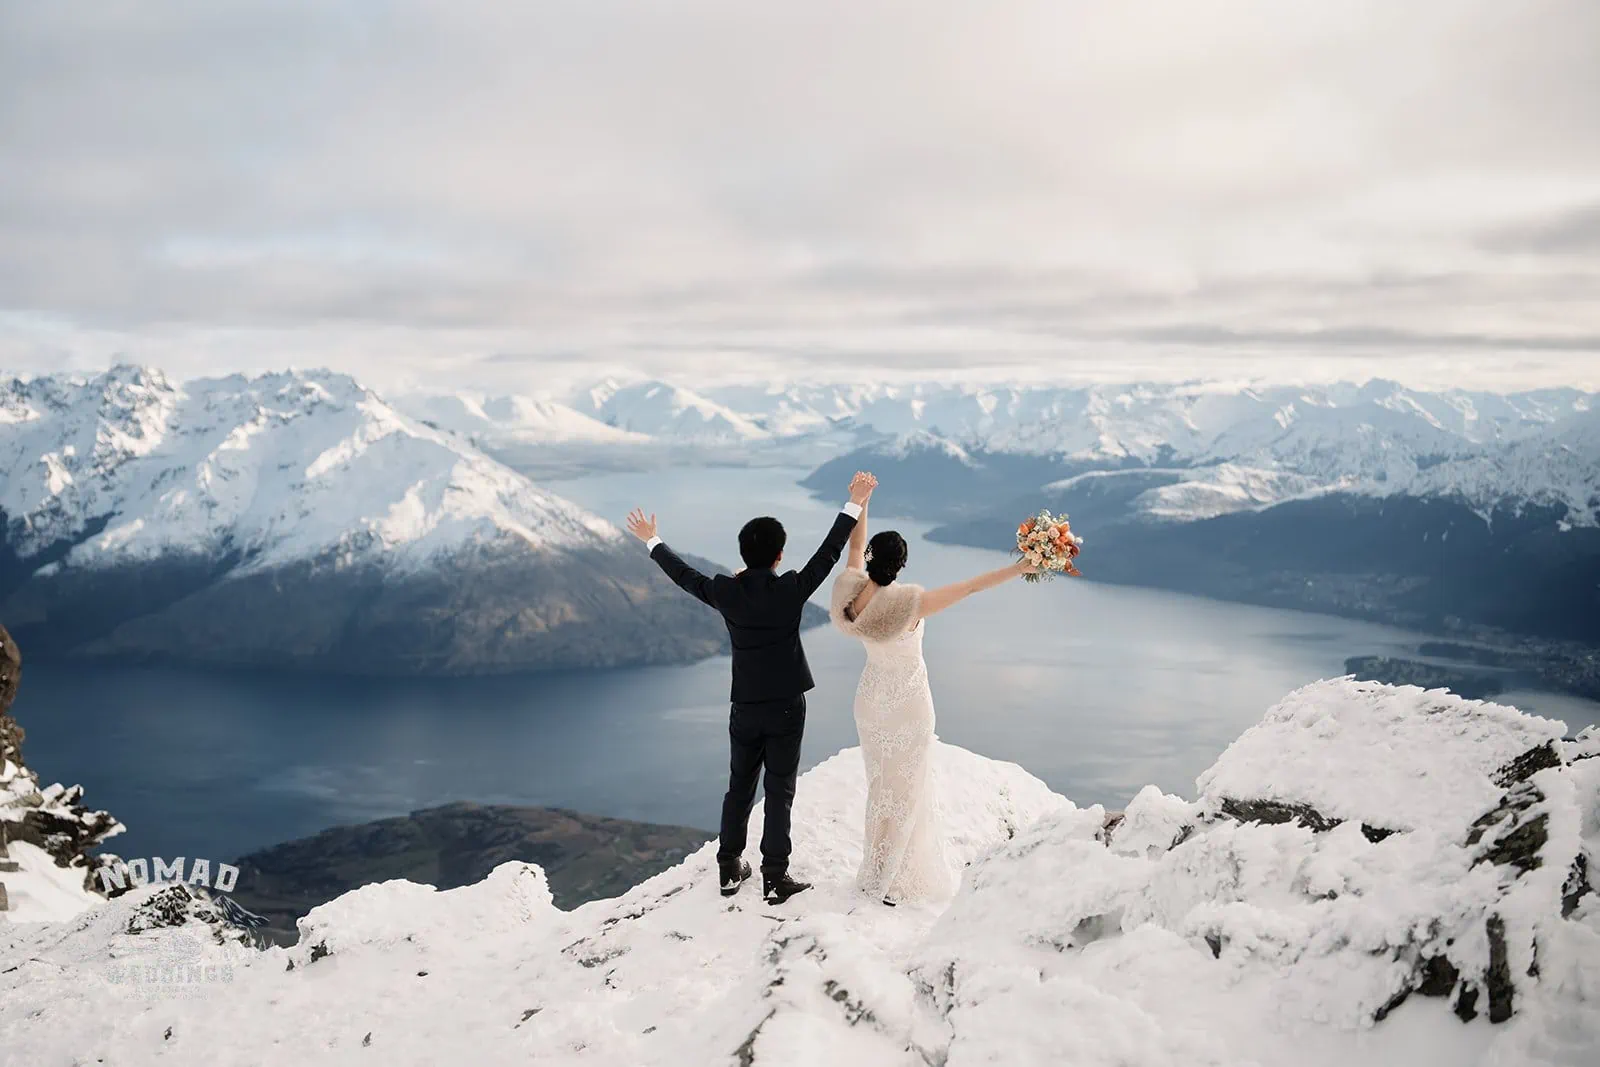 Joanna and Tony standing on top of a snowy mountain overlooking Lake Wanaka during their pre-wedding shoot in Queenstown, New Zealand.